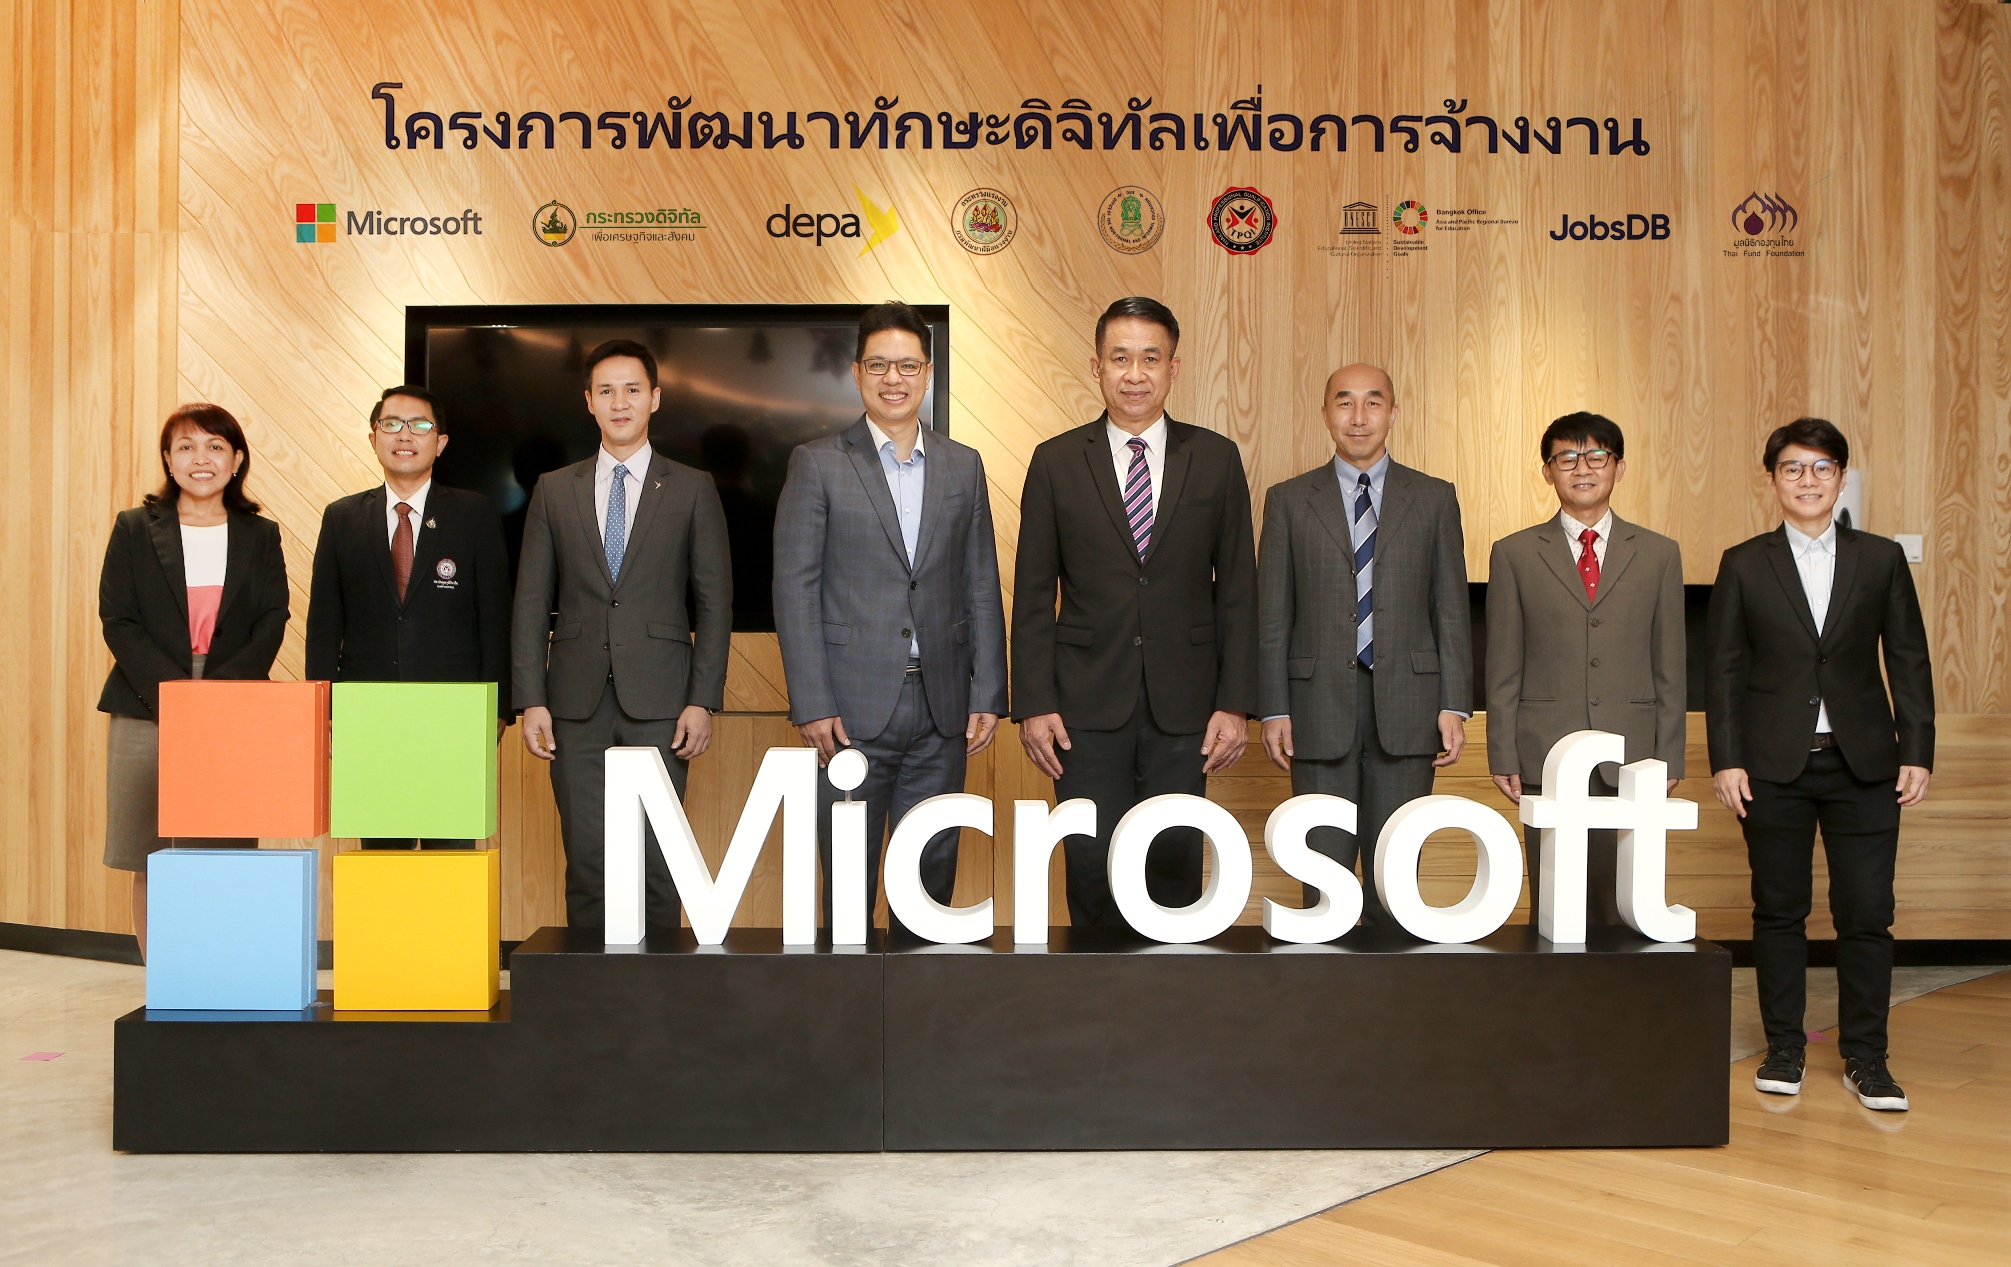 Group of executives standing with 3D Microsoft logo